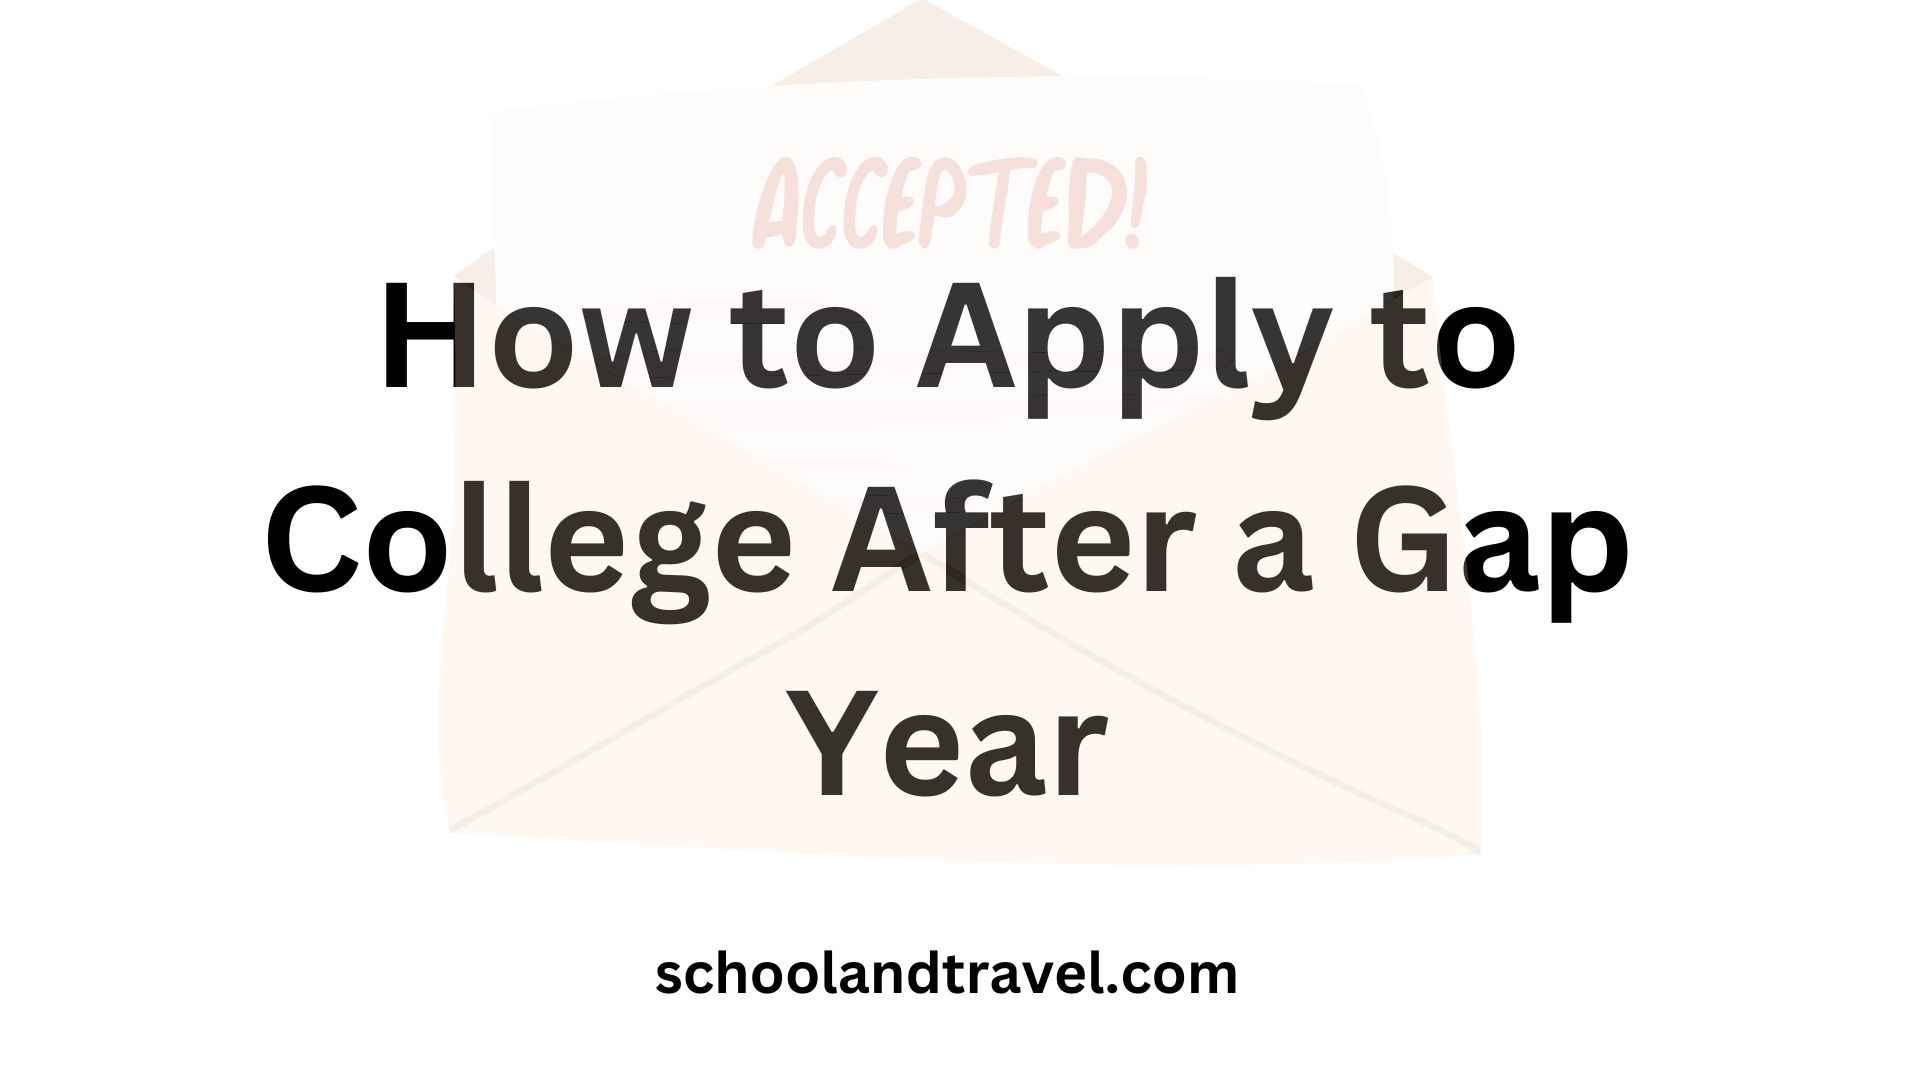 How to Apply to College After a Gap Year (Reasons, 7 Tips, FAQs)